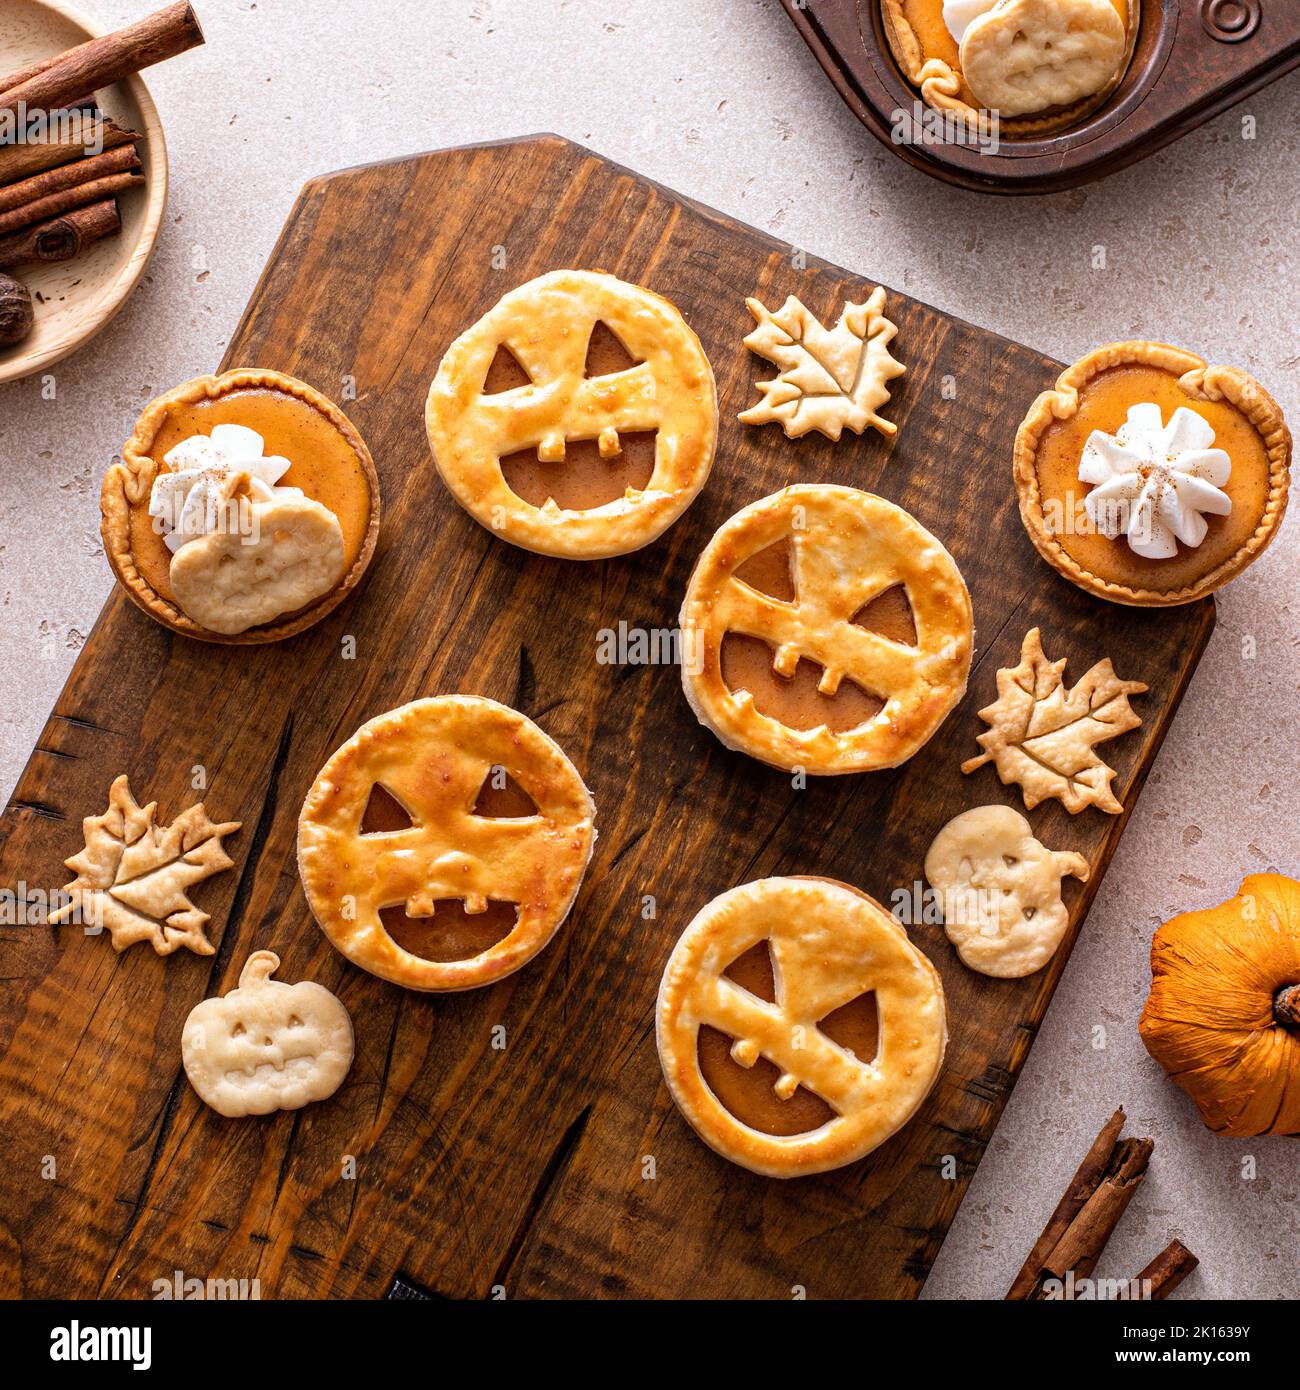 Halloween pumpkin pies with carved pumpkin face on top Stock Photo